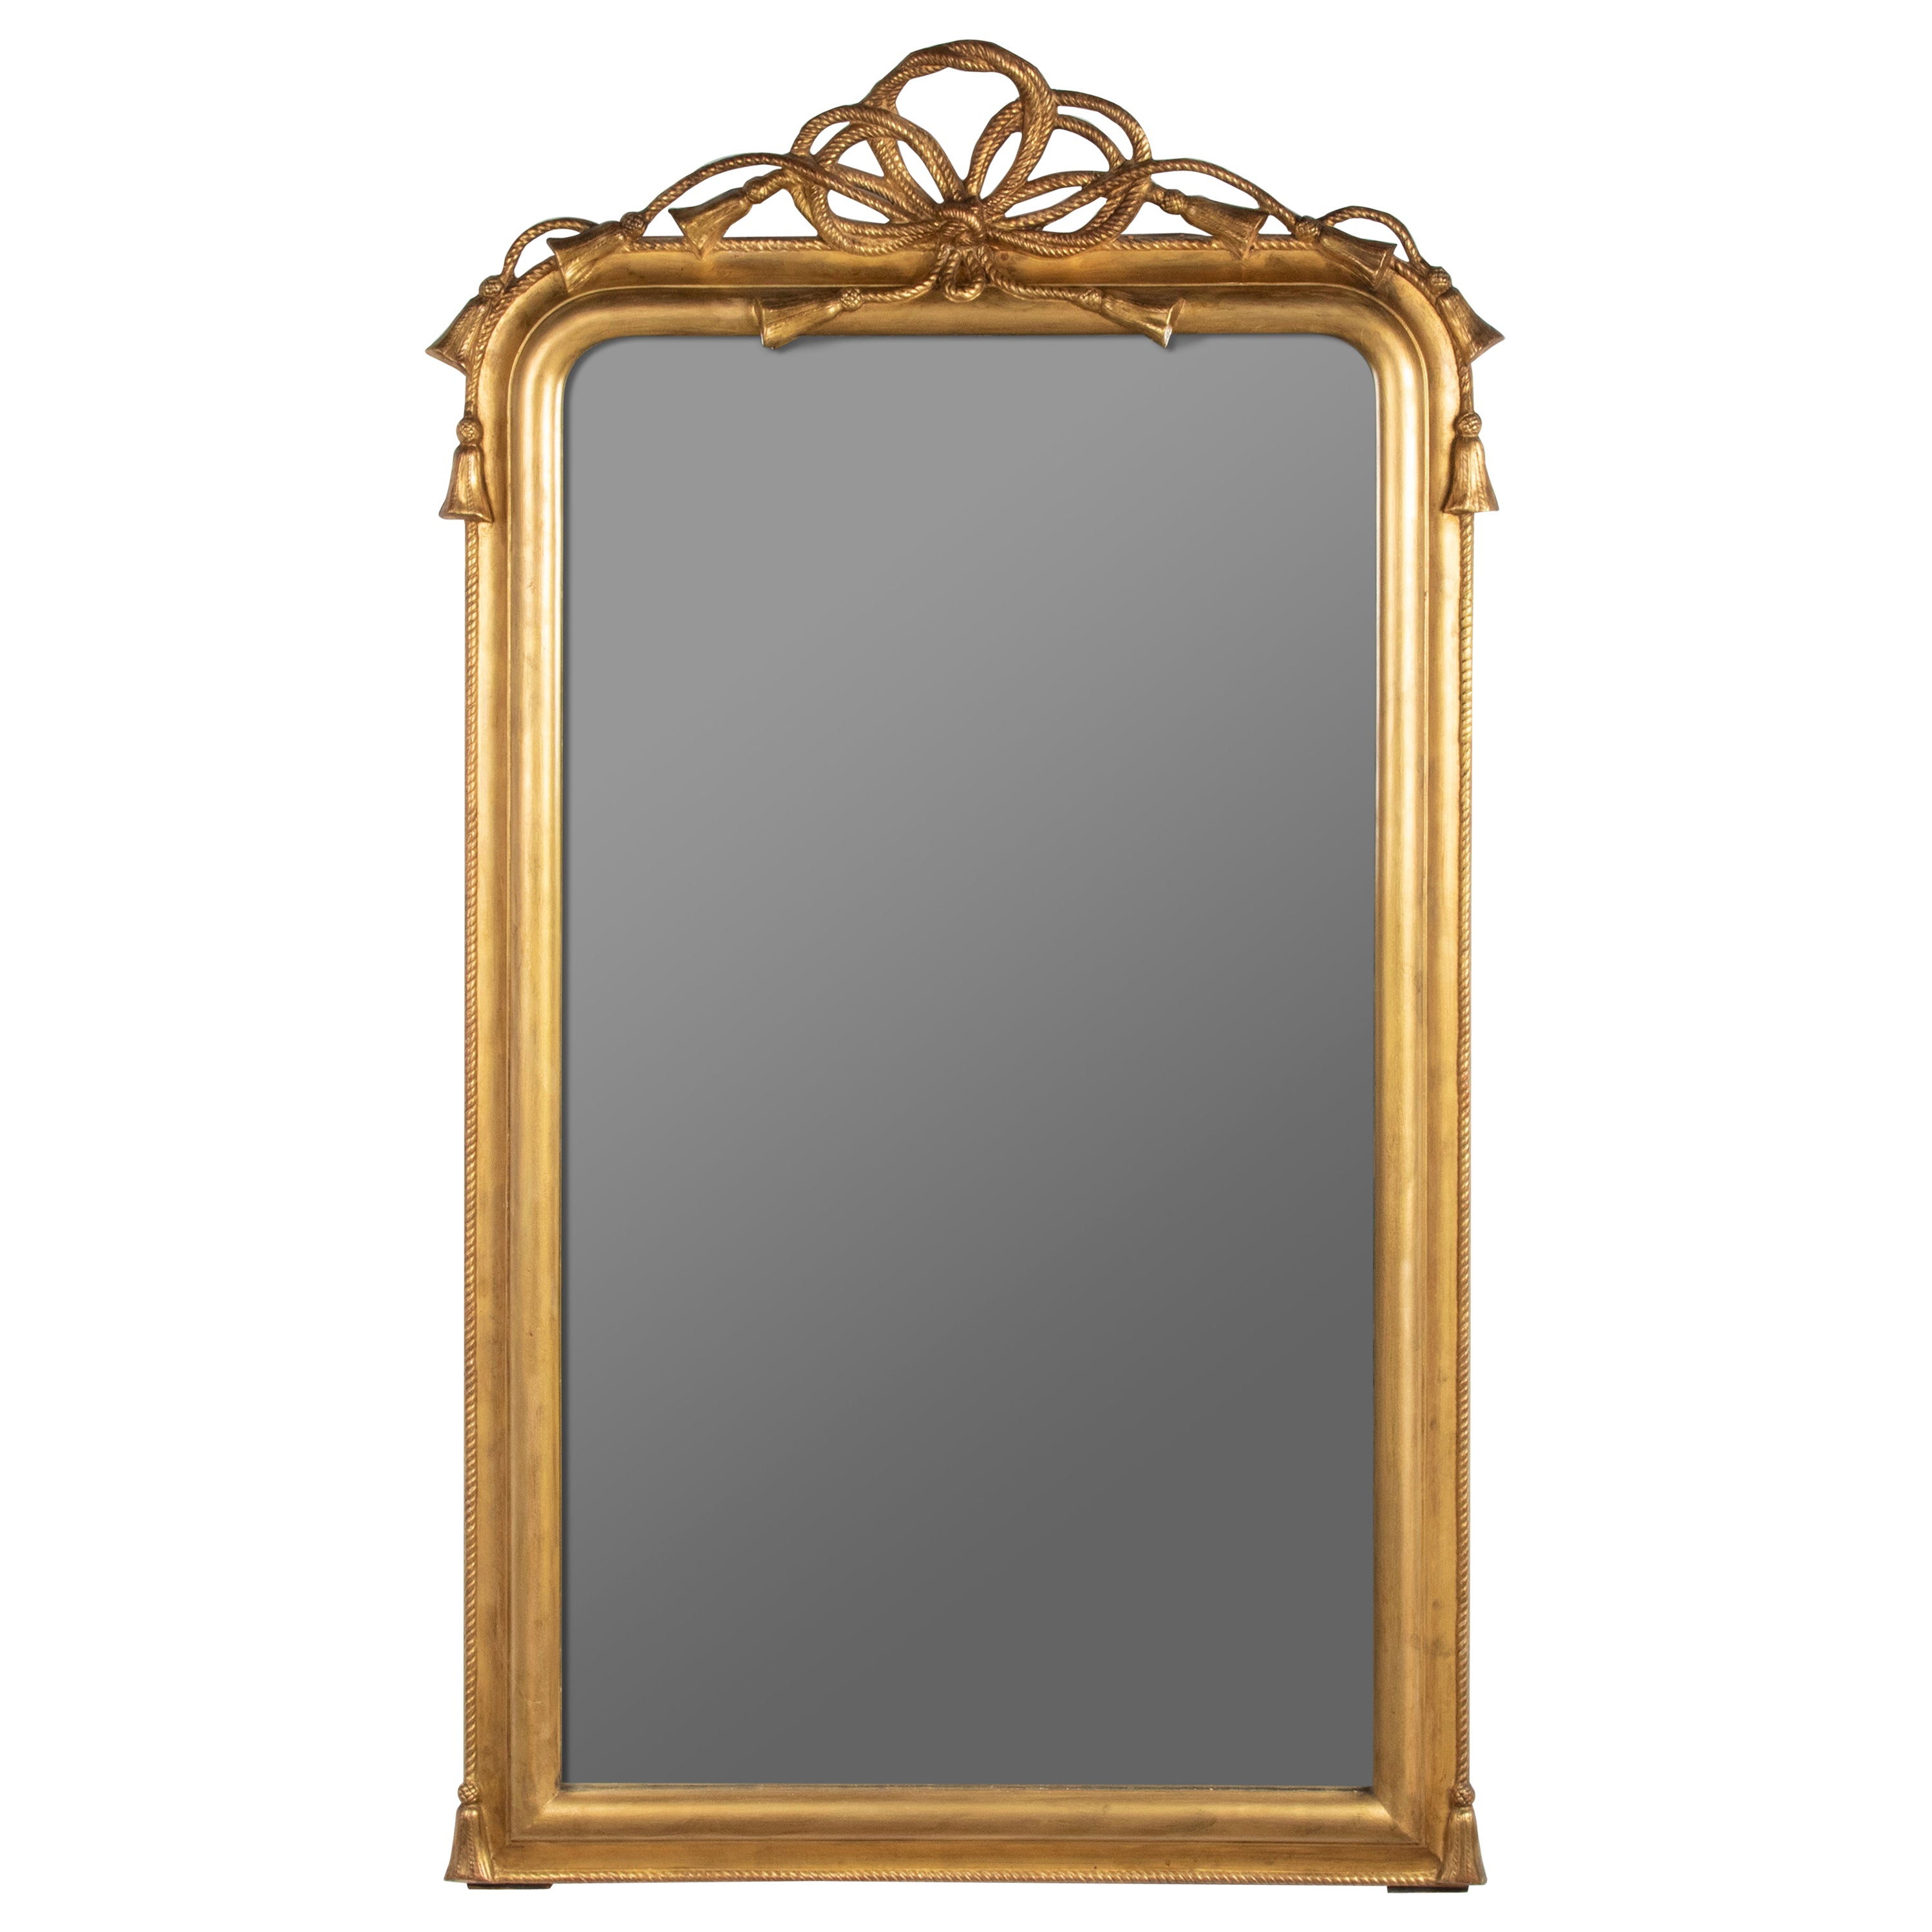 19th Century Napoleon III Gilded Wall Mirror with Rope and Tassels